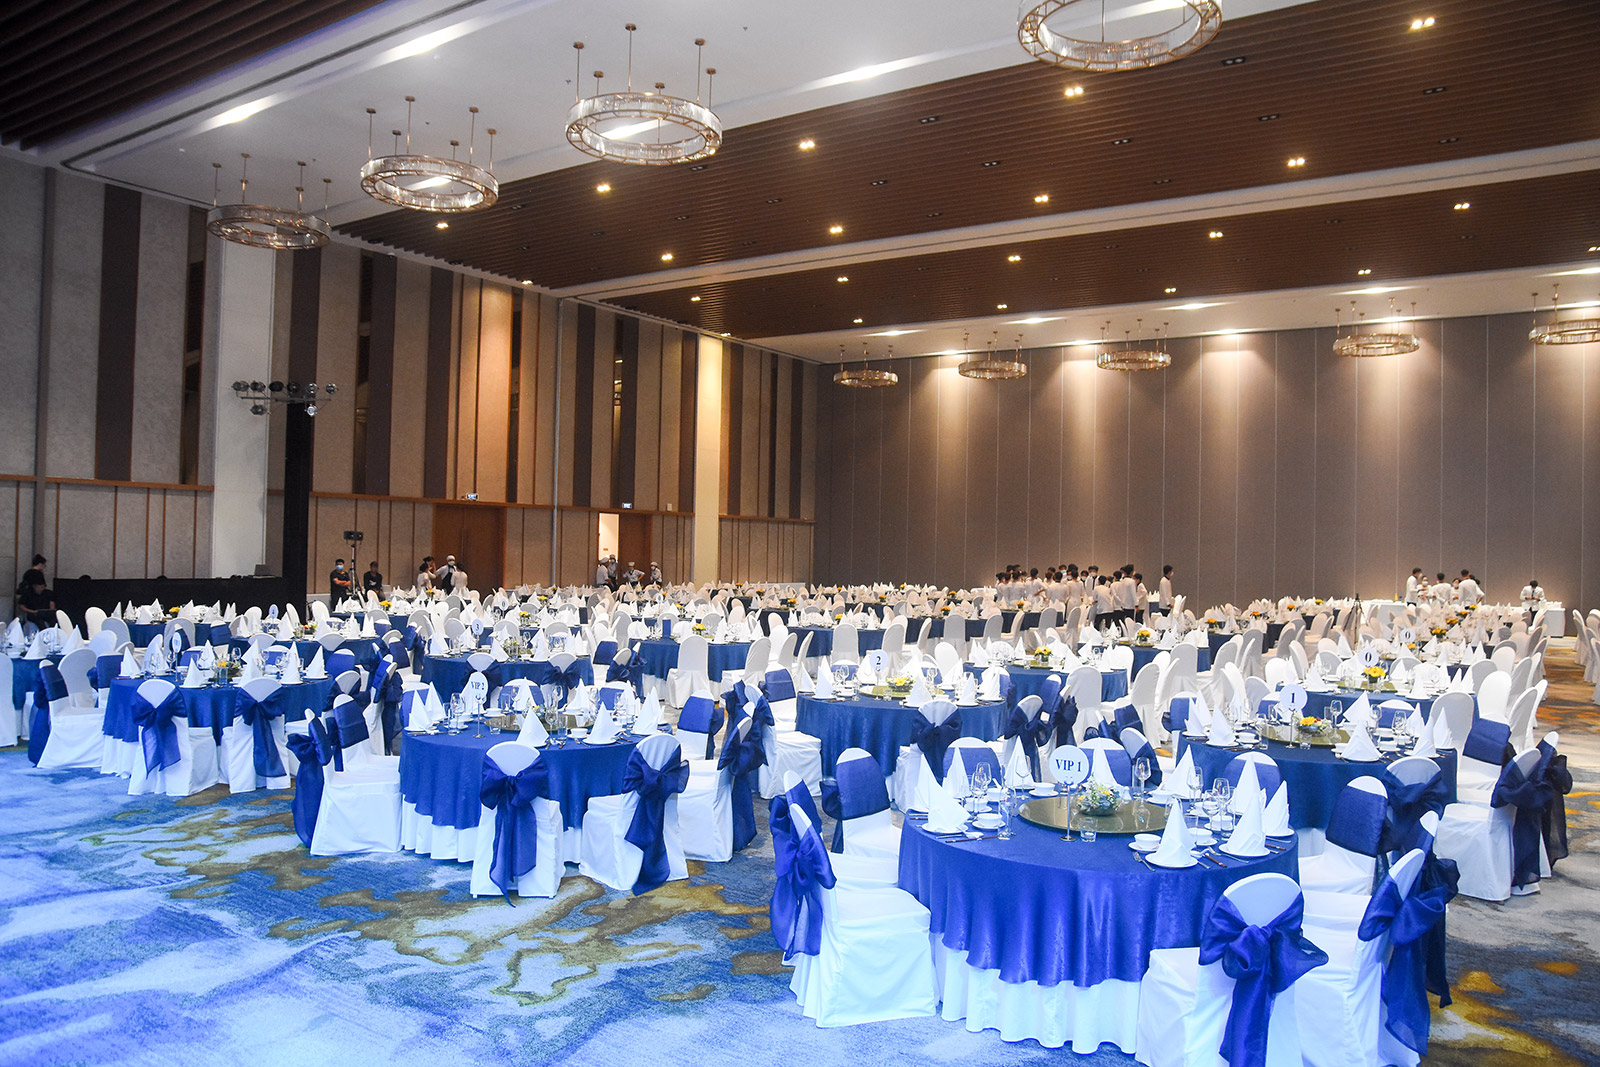 GALA DINNER OF STAVIAN COMPANY GATHERED 600 GUESTS AROUND THE WORLD